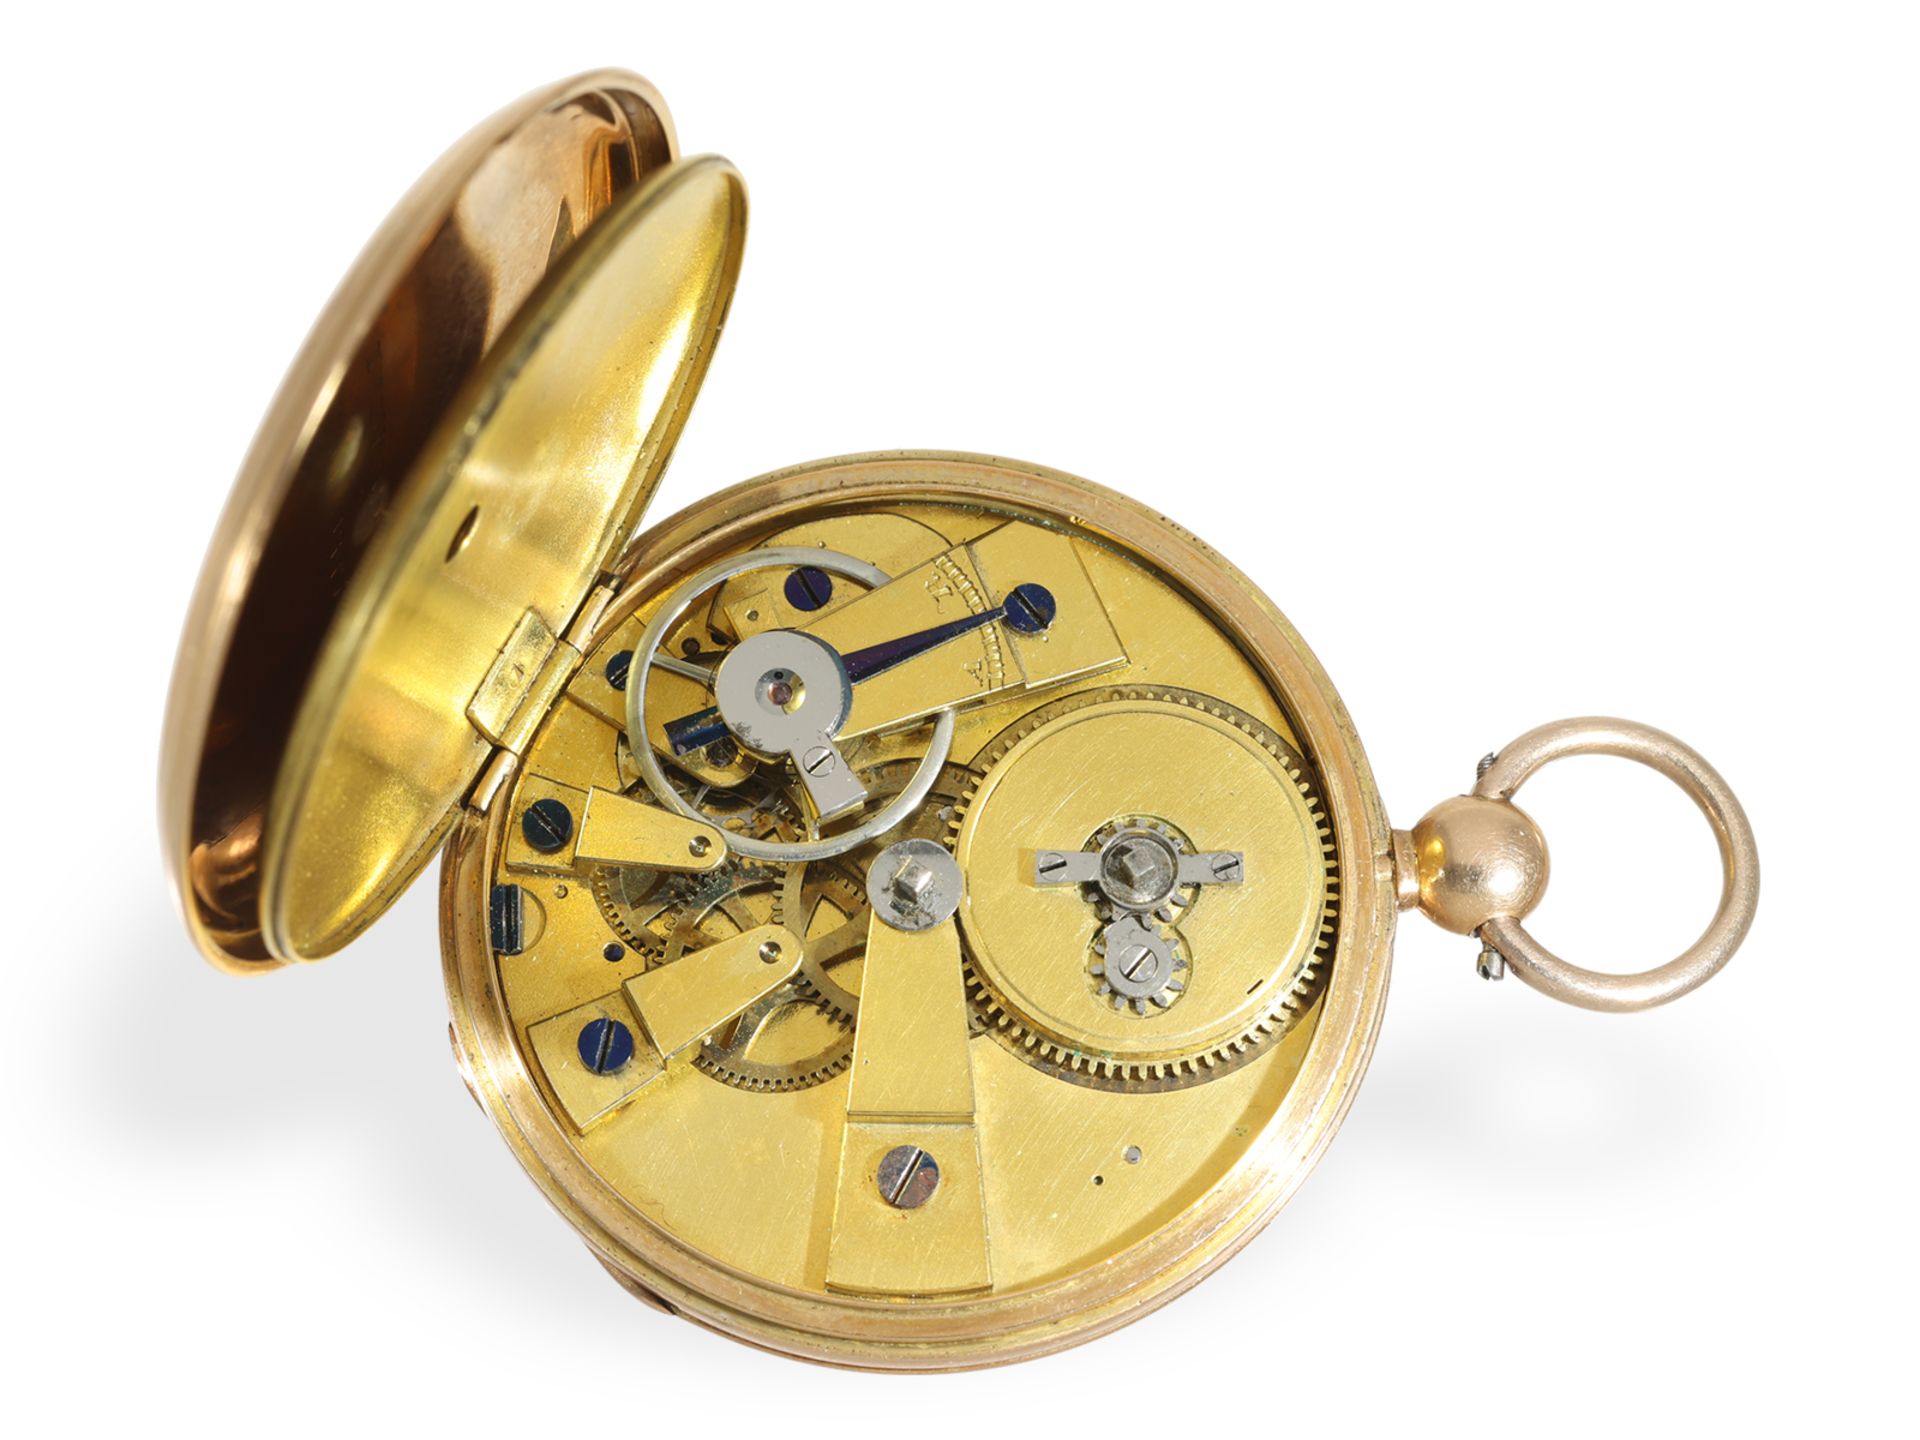 Pocket watch: pink gold lepine in very good condition, ca. 1840 - Image 2 of 4